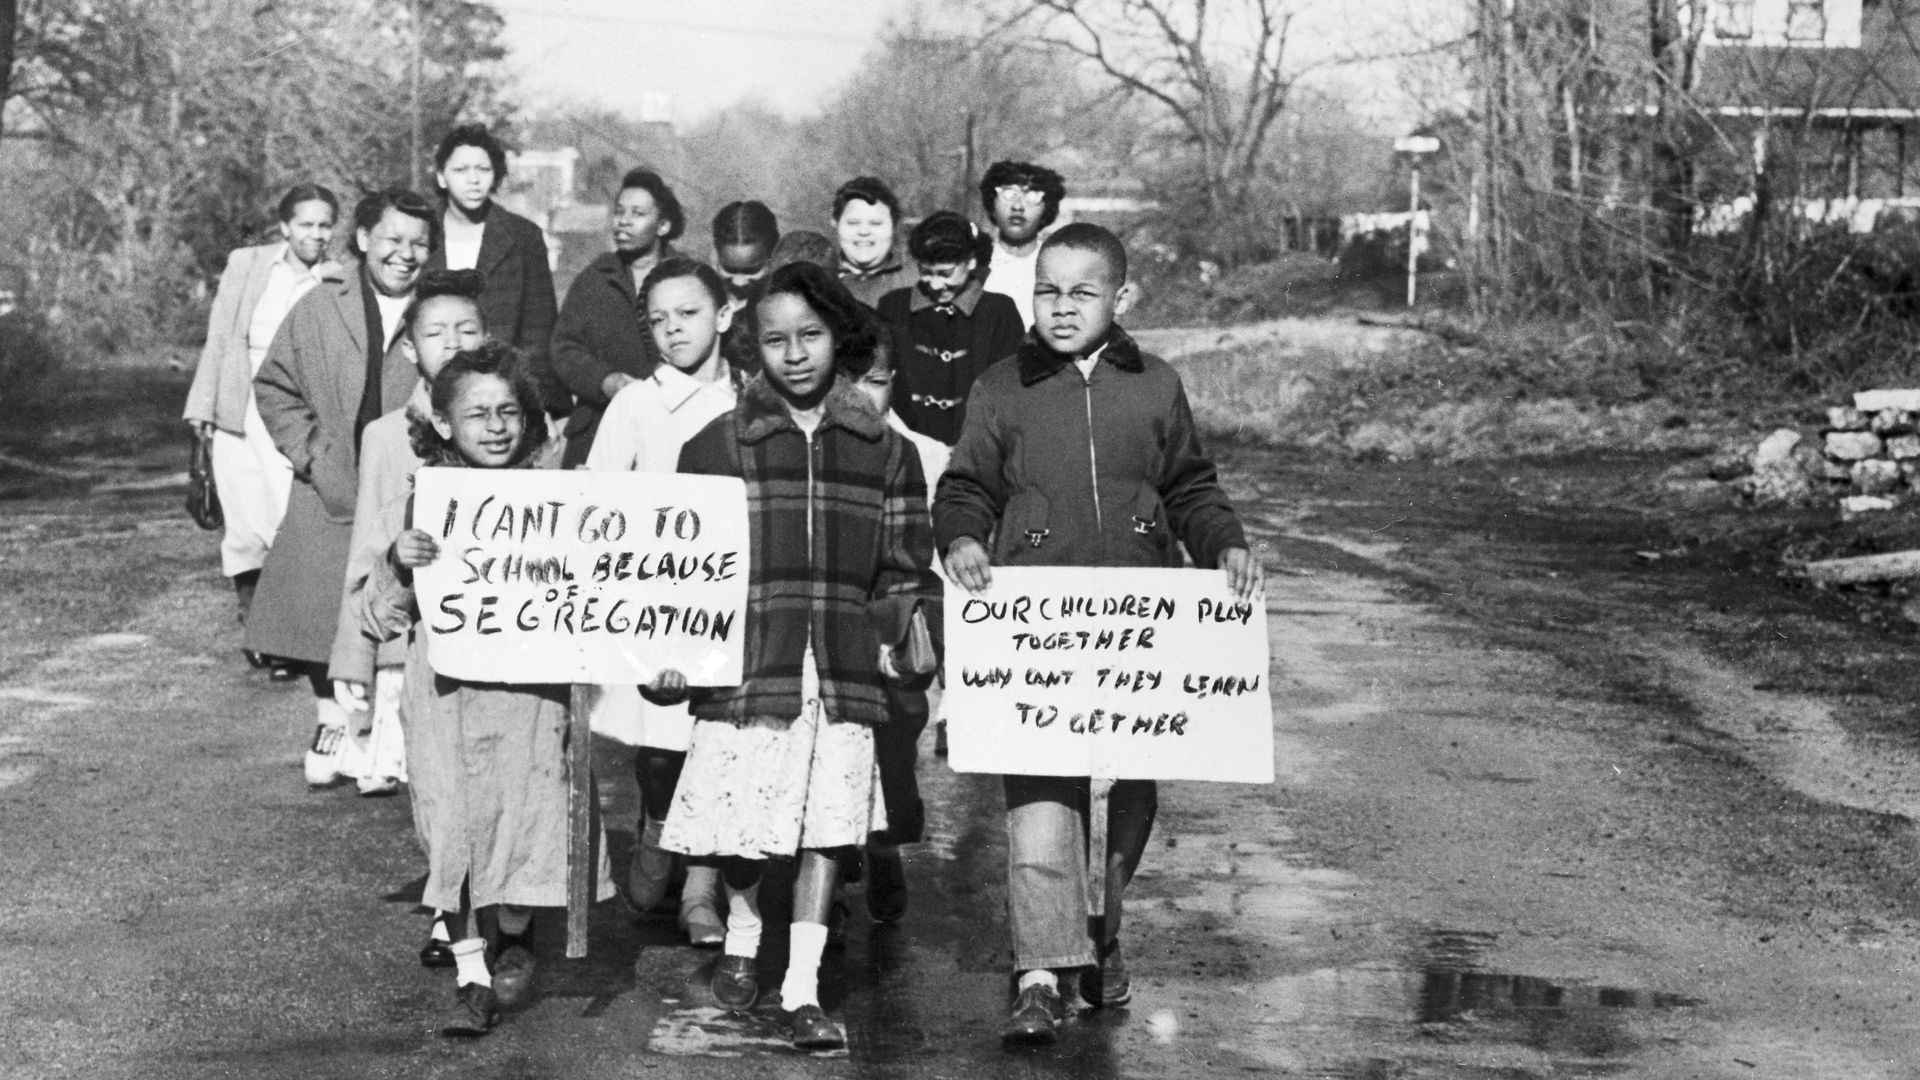 Sixteen Black children accompanied by 4 mothers carry anti-segregation signs as they walk to Webster School in Hillsboro, Ohio, in 1956.